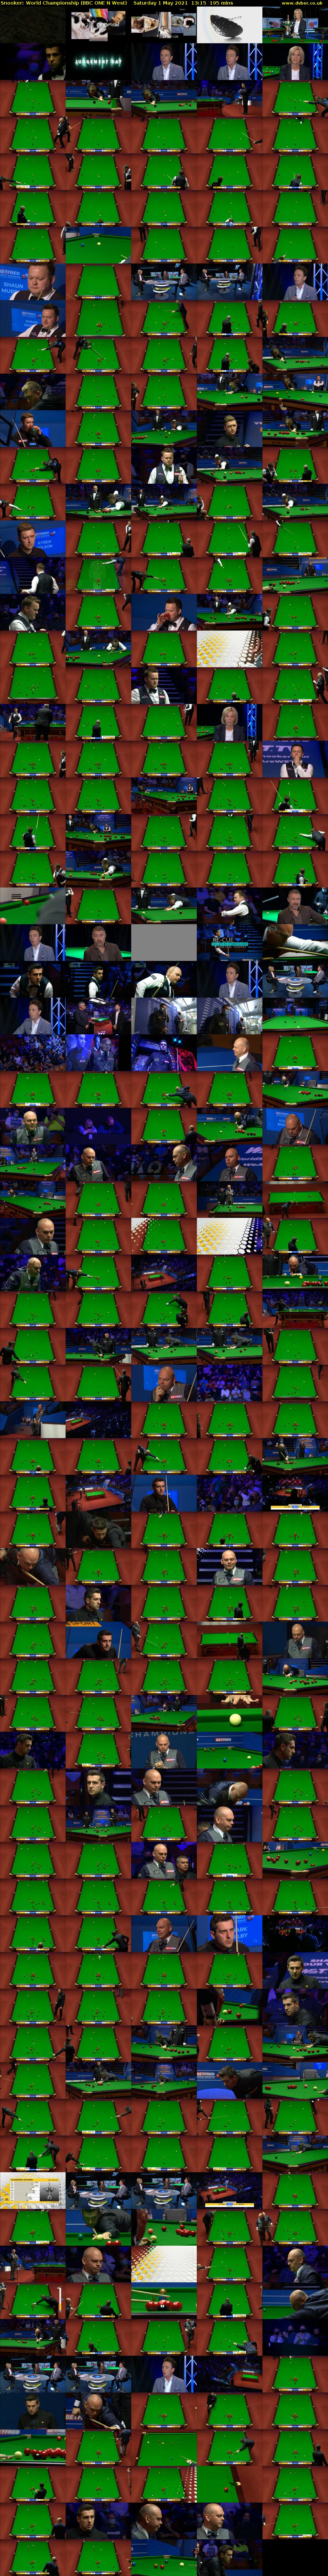 Snooker: World Championship (BBC ONE N West) Saturday 1 May 2021 13:15 - 16:30